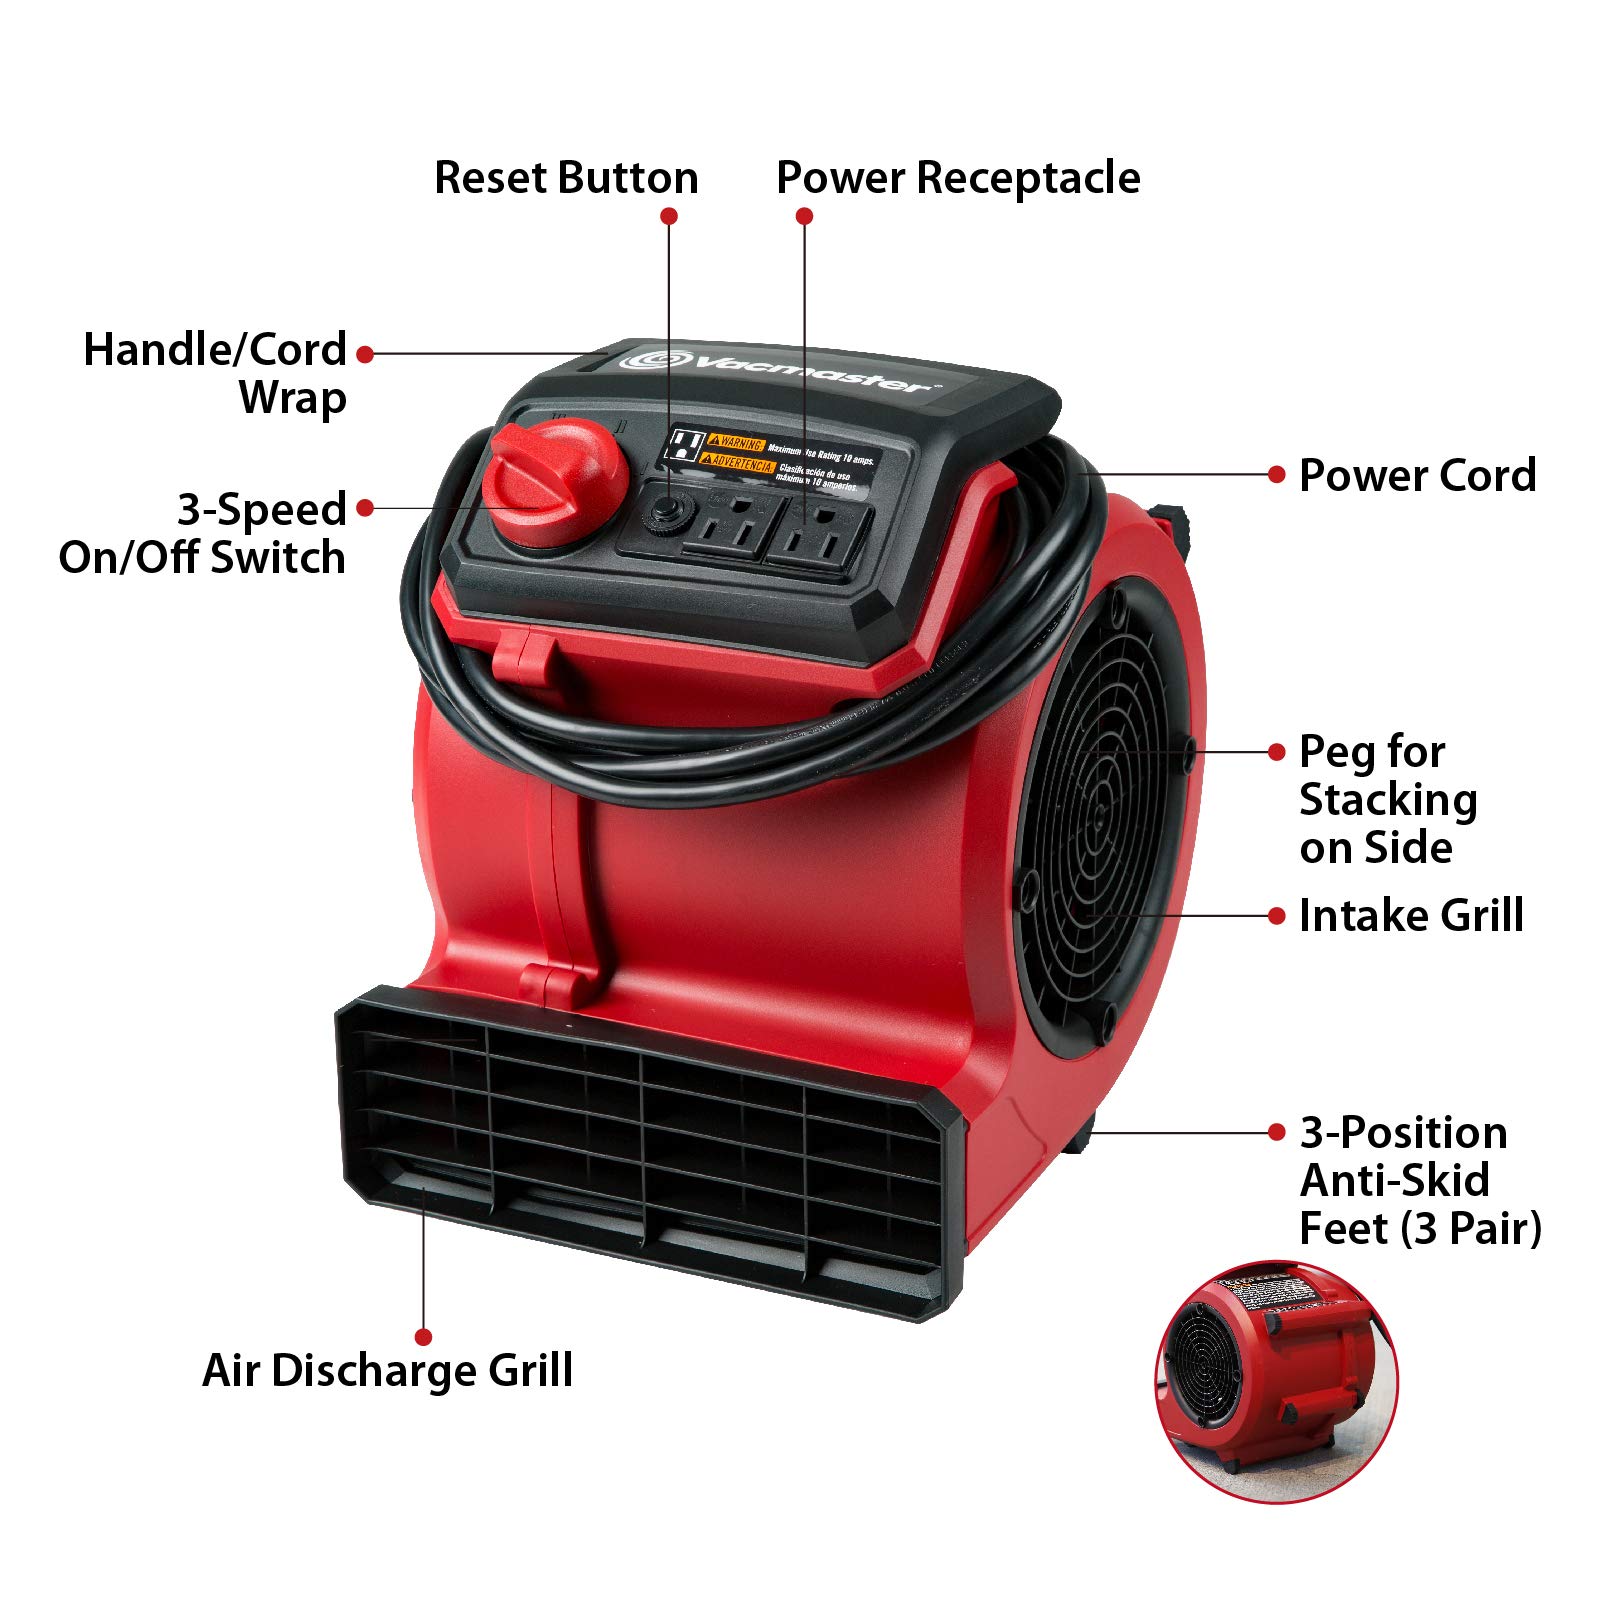 Vacmaster Red Edition AM201 1101 550 CFM Portable Air Mover Floor and Carpet Dryer for Drying and Cooling